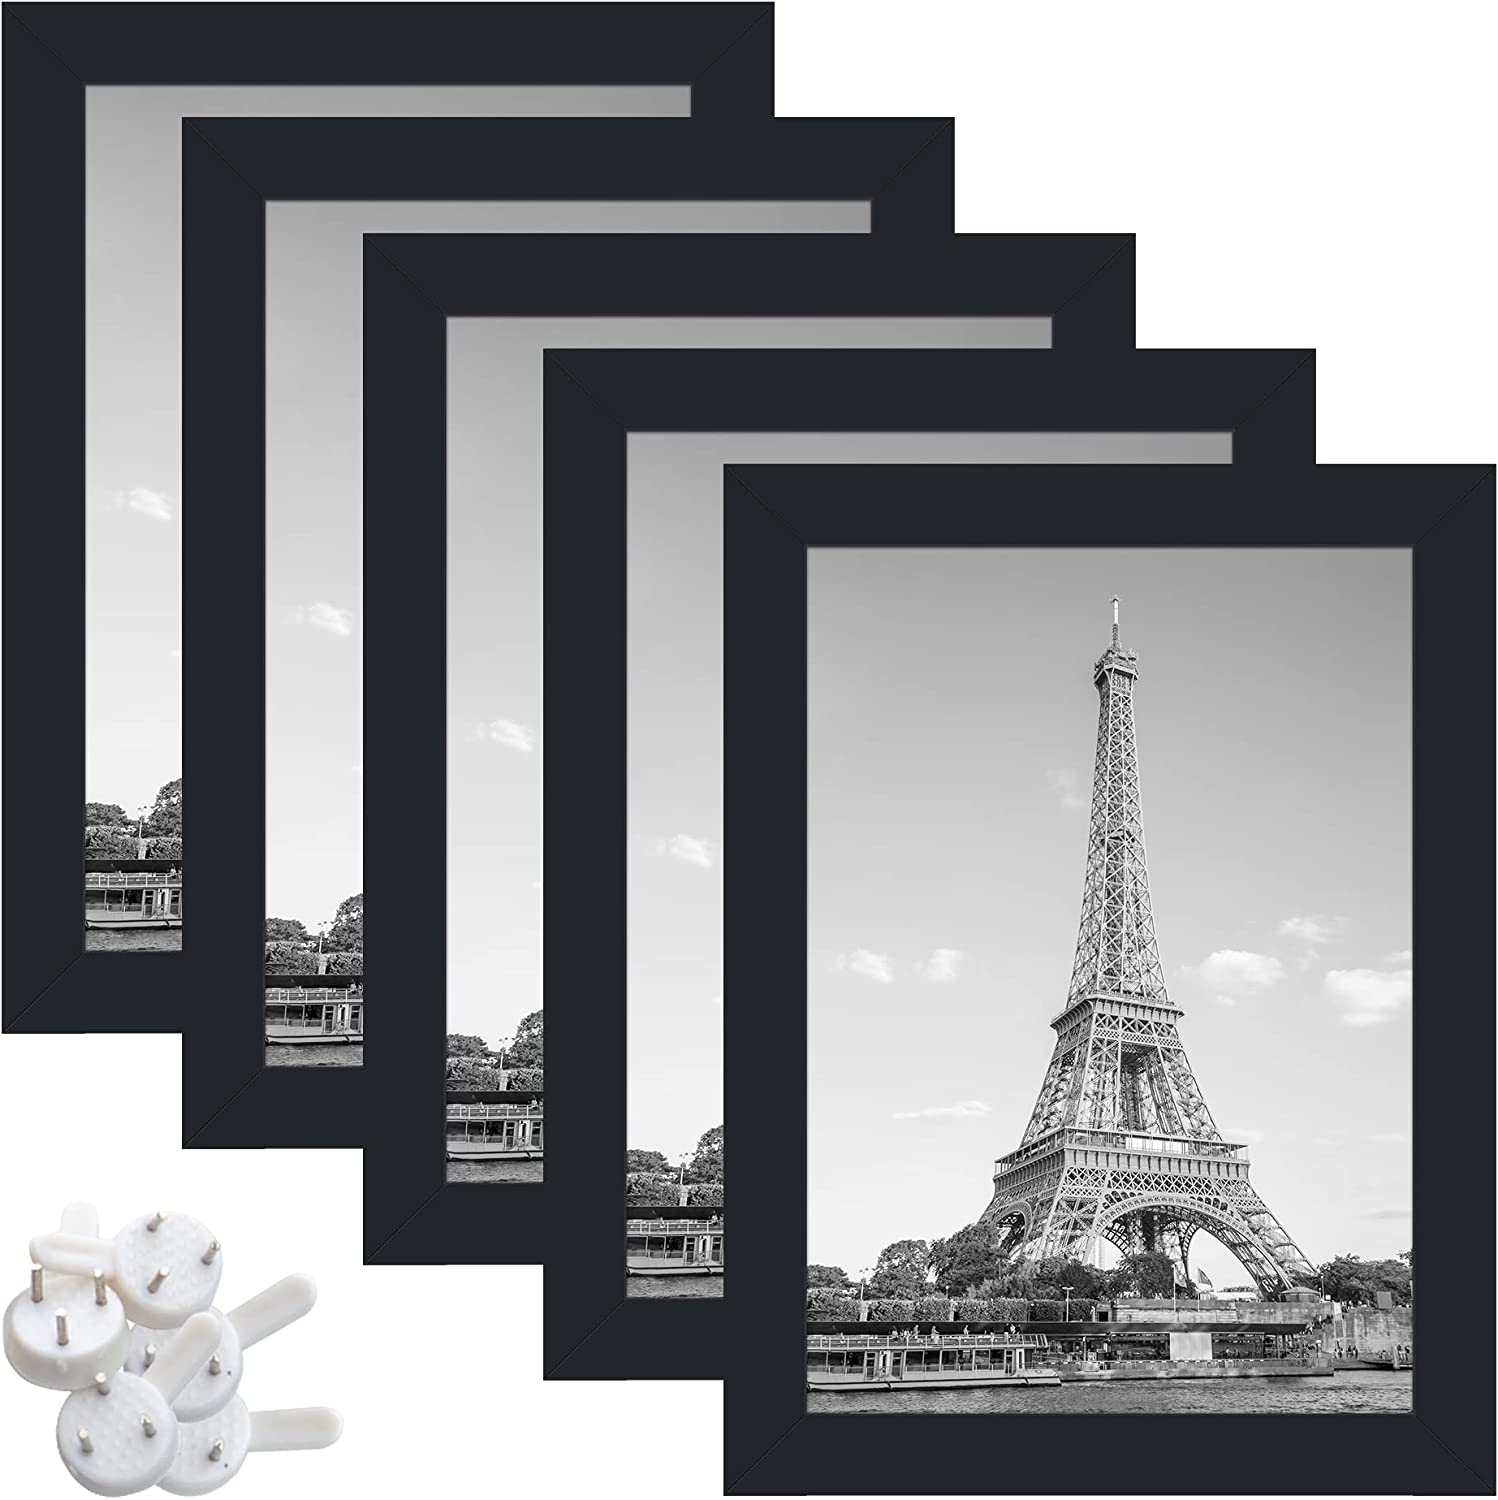 upsimples 5x7 Picture Frame Set of 3, Made of High Definition Glass fo –  Upsimples Direct